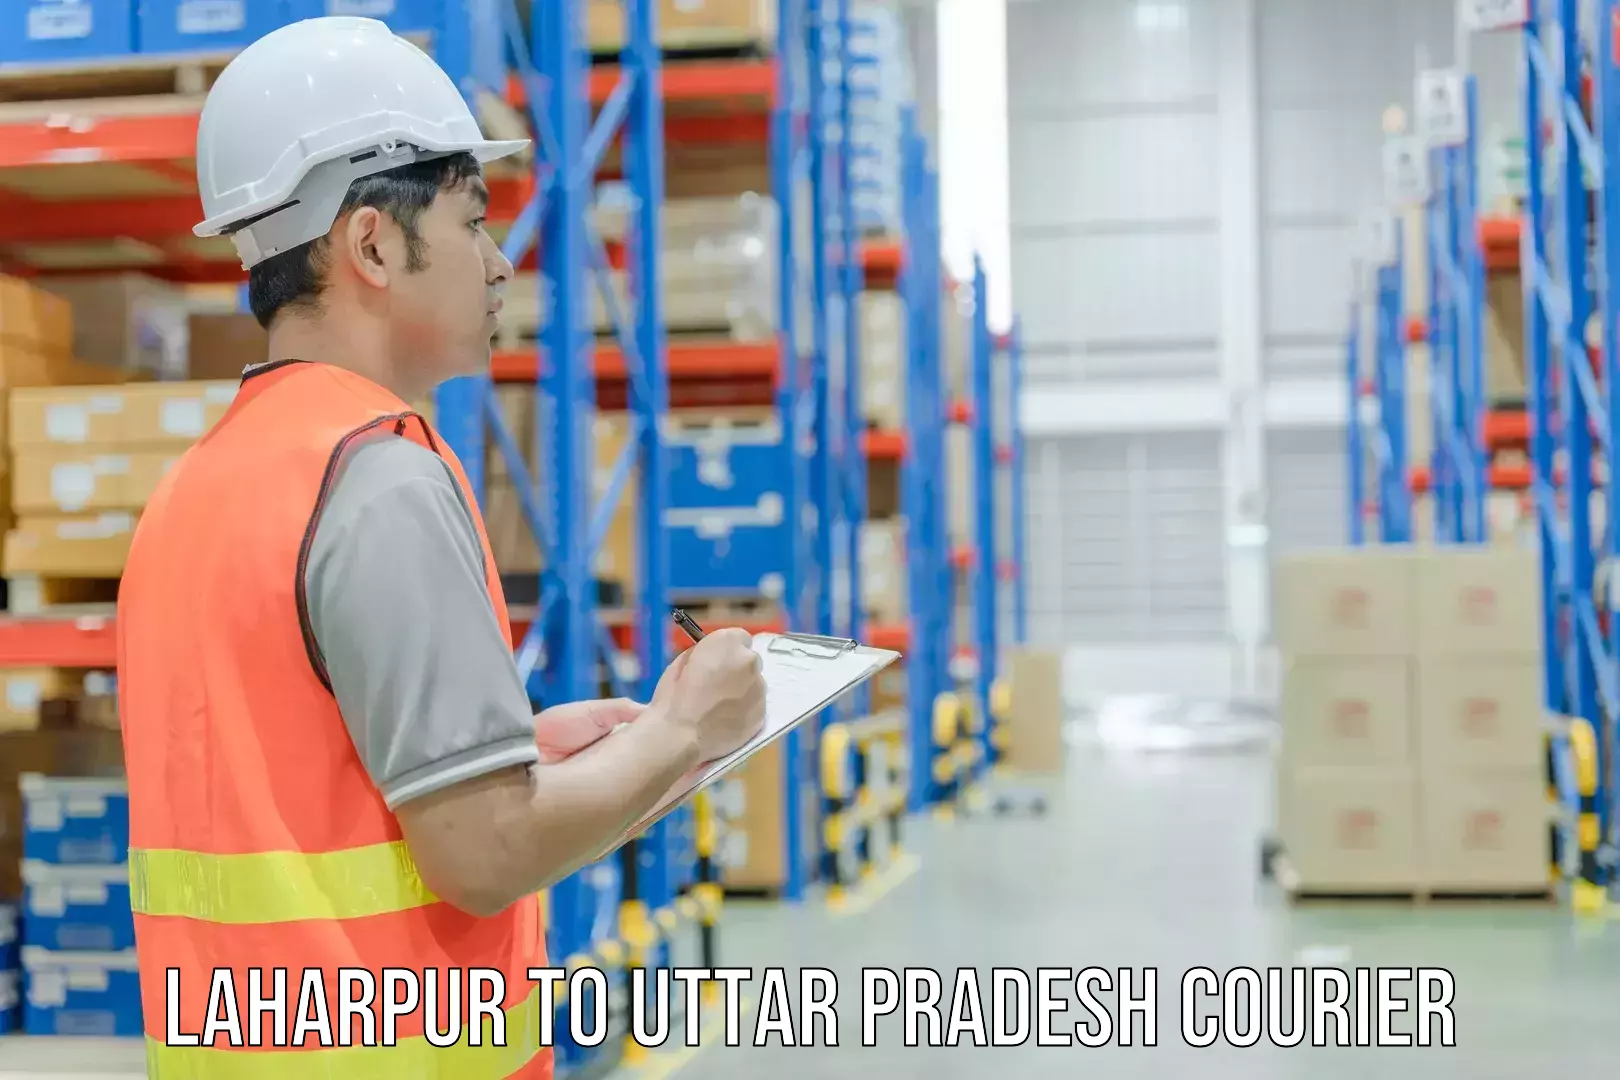 Global courier networks Laharpur to Bewar